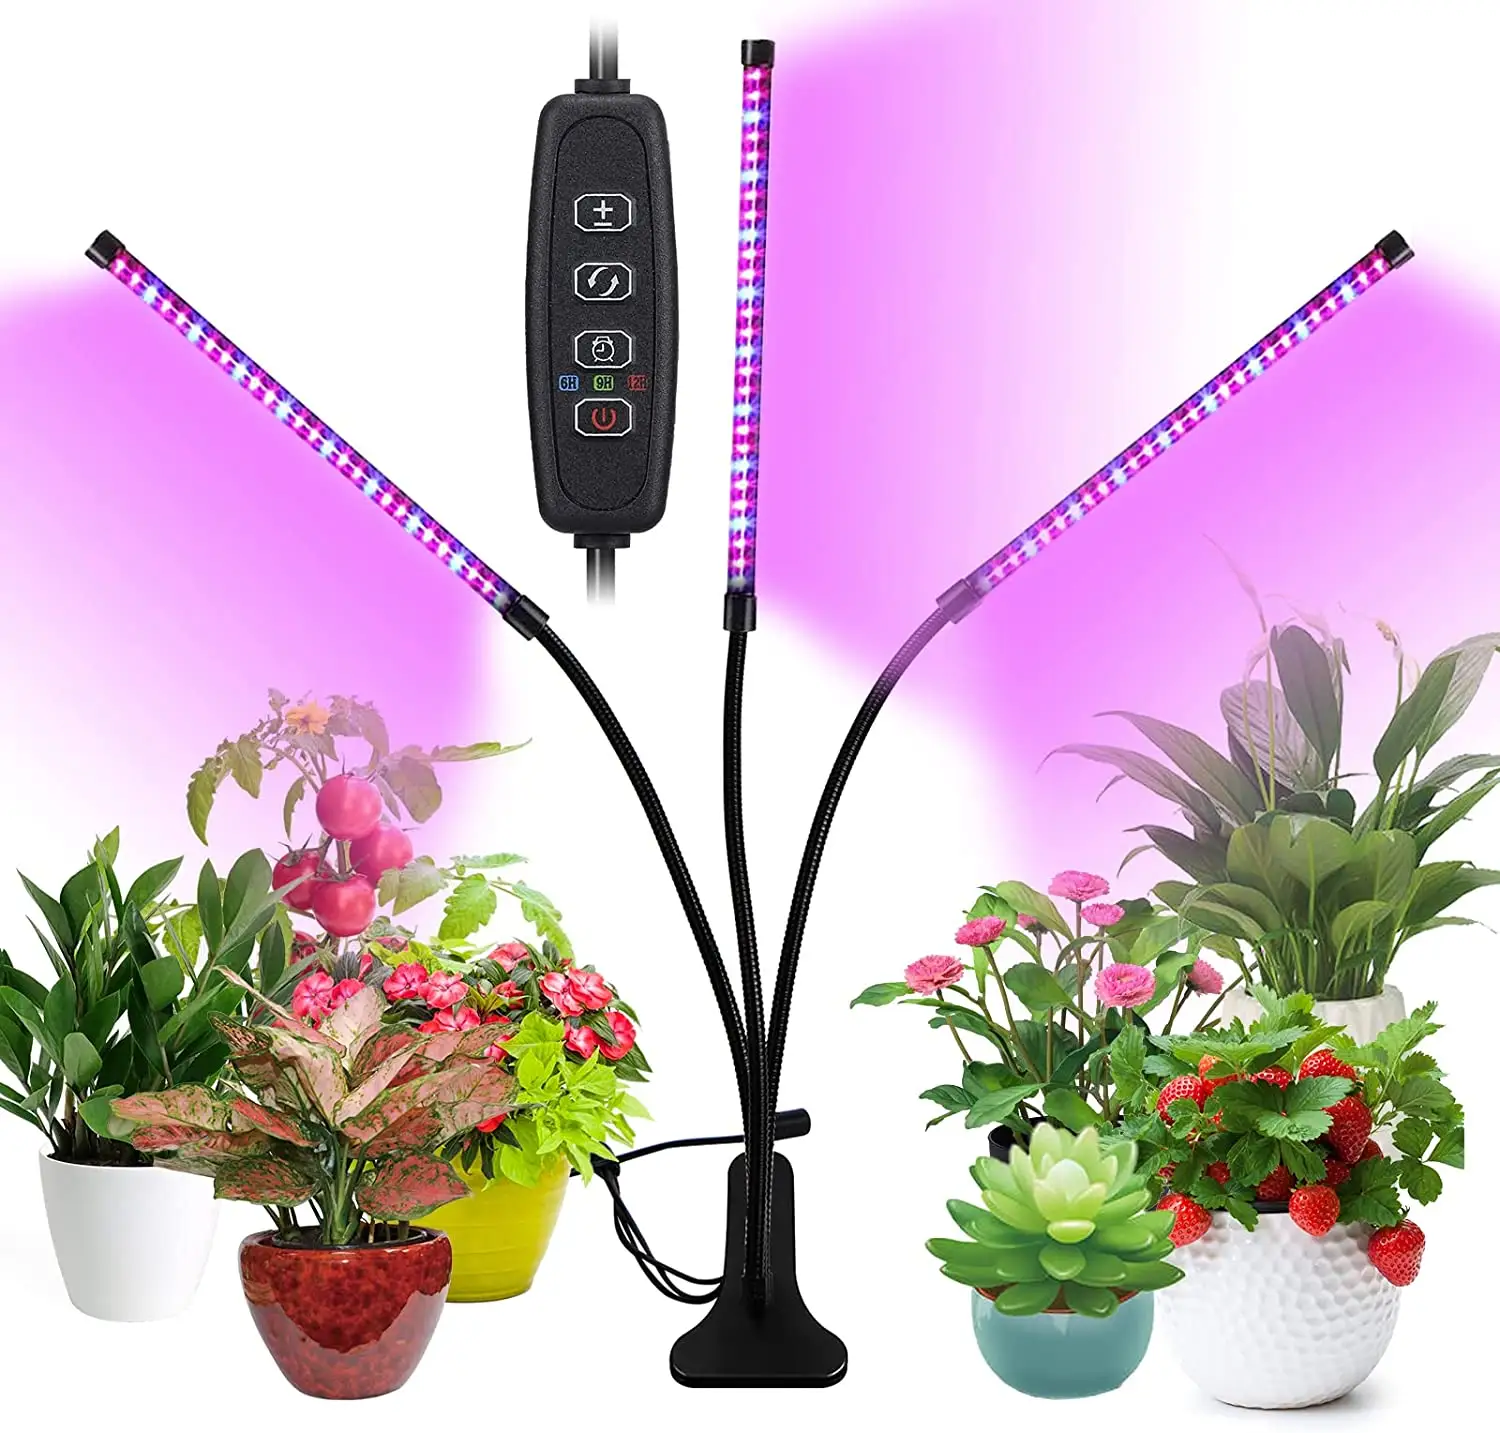 Angle Adjustable Led Grow Light Full Spectrum Beads Plant Led Grow Light Flower Dimmable Blue Red 60 Led Grow Lights With Timer